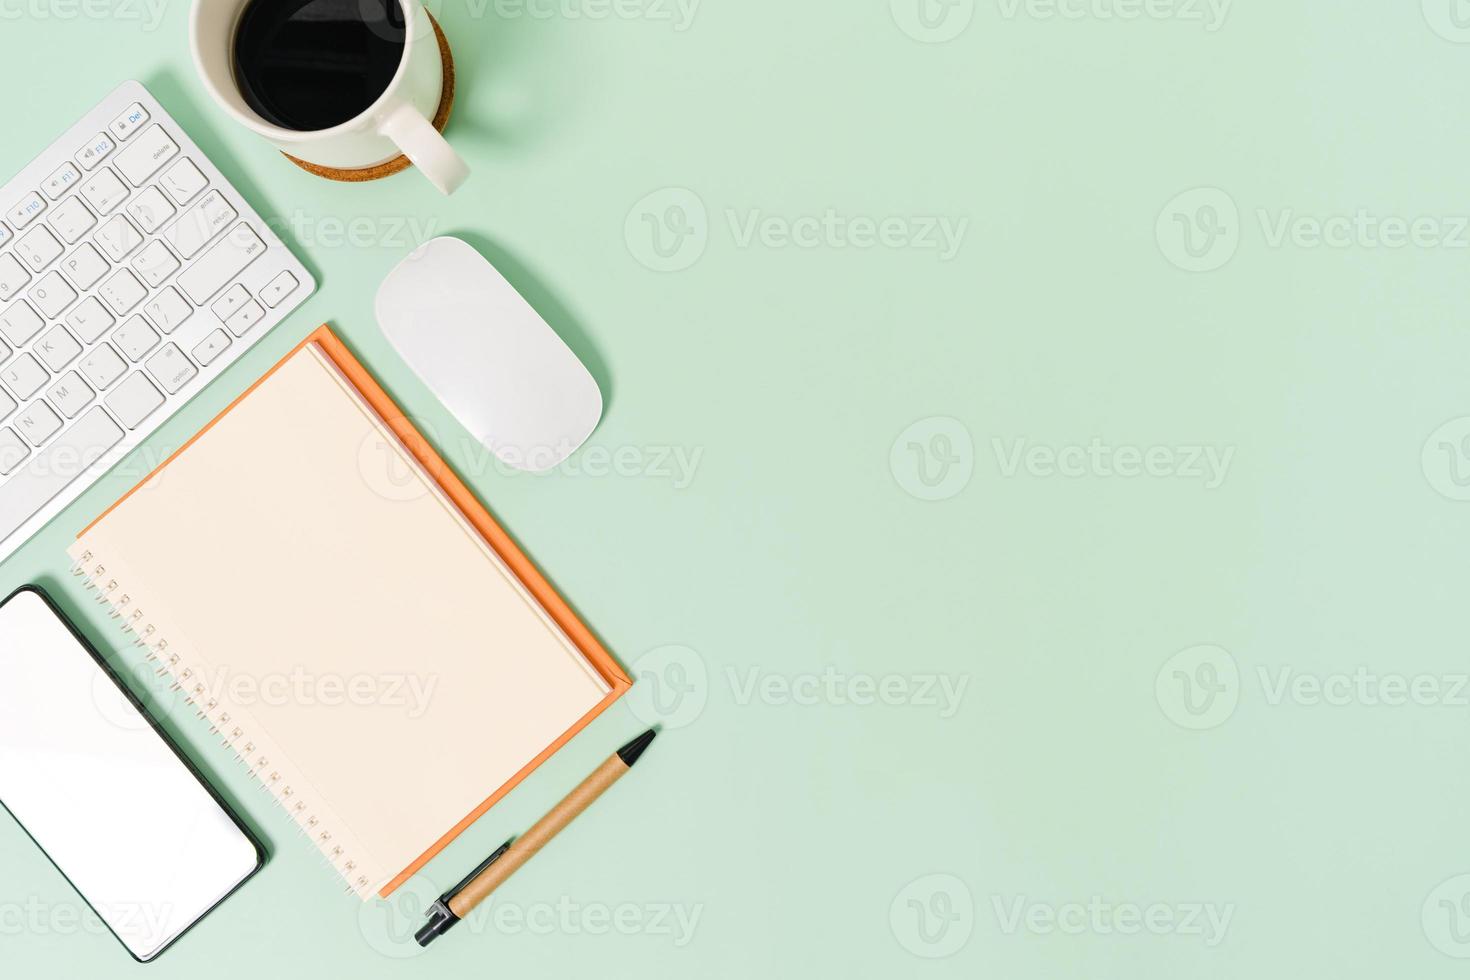 Minimal work space - Creative flat lay photo of workspace desk. Top view office desk with keyboard, mouse and notebook on pastel green color background. Top view with copy space, flat lay photography.